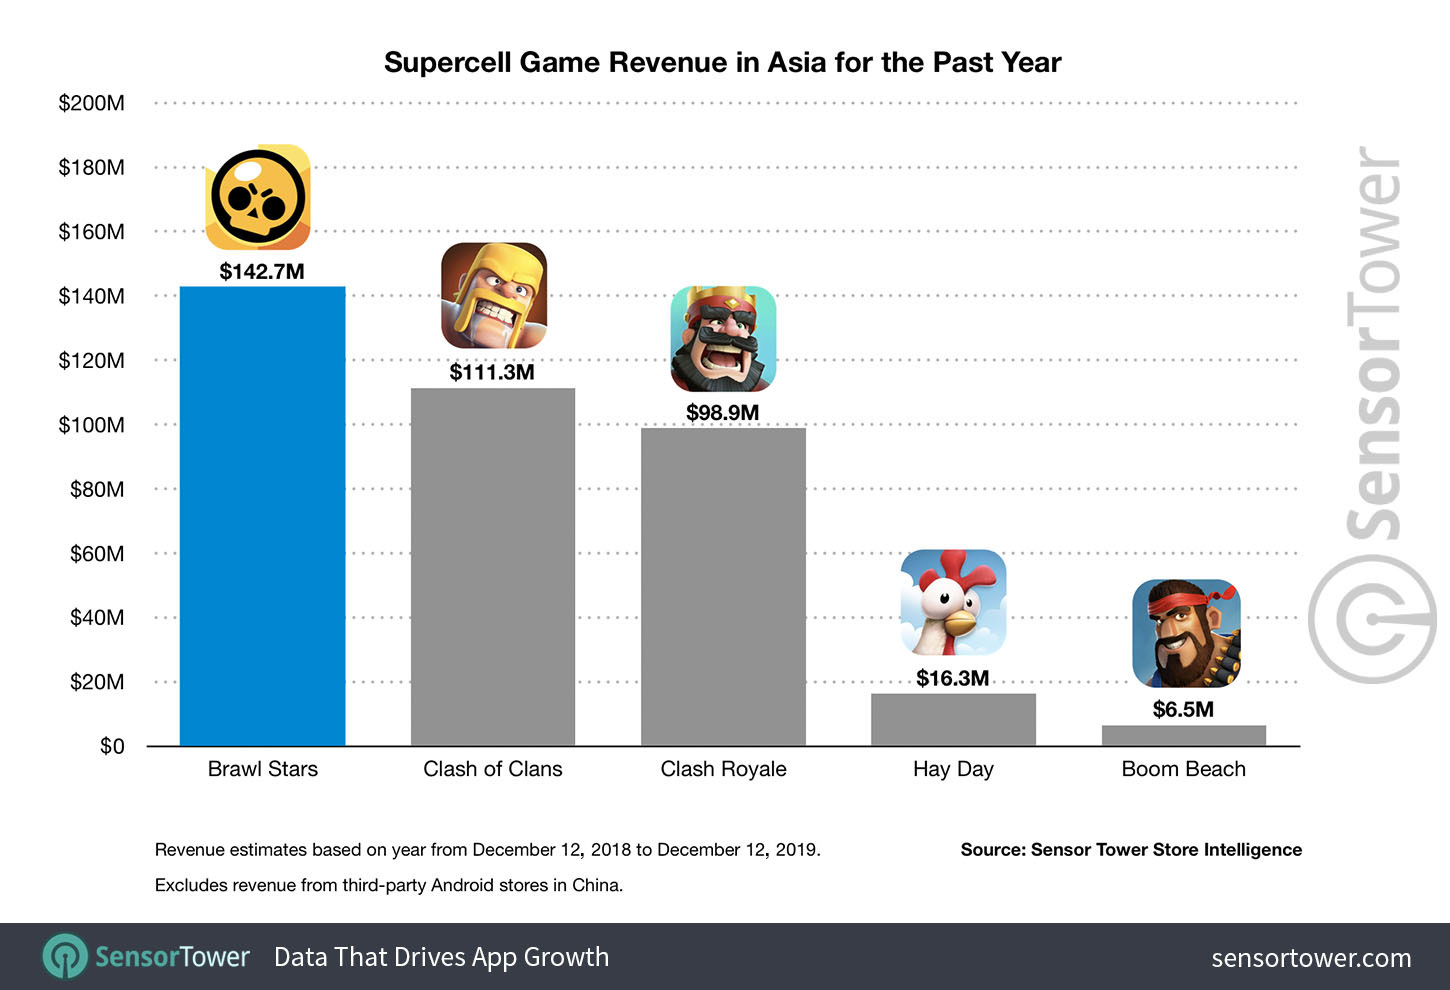 Brawl Stars Surpassed Clash of Clans as the Highest Grossing Supercell Game  in 2019 Q1, by Cara Lui, Measurable AI